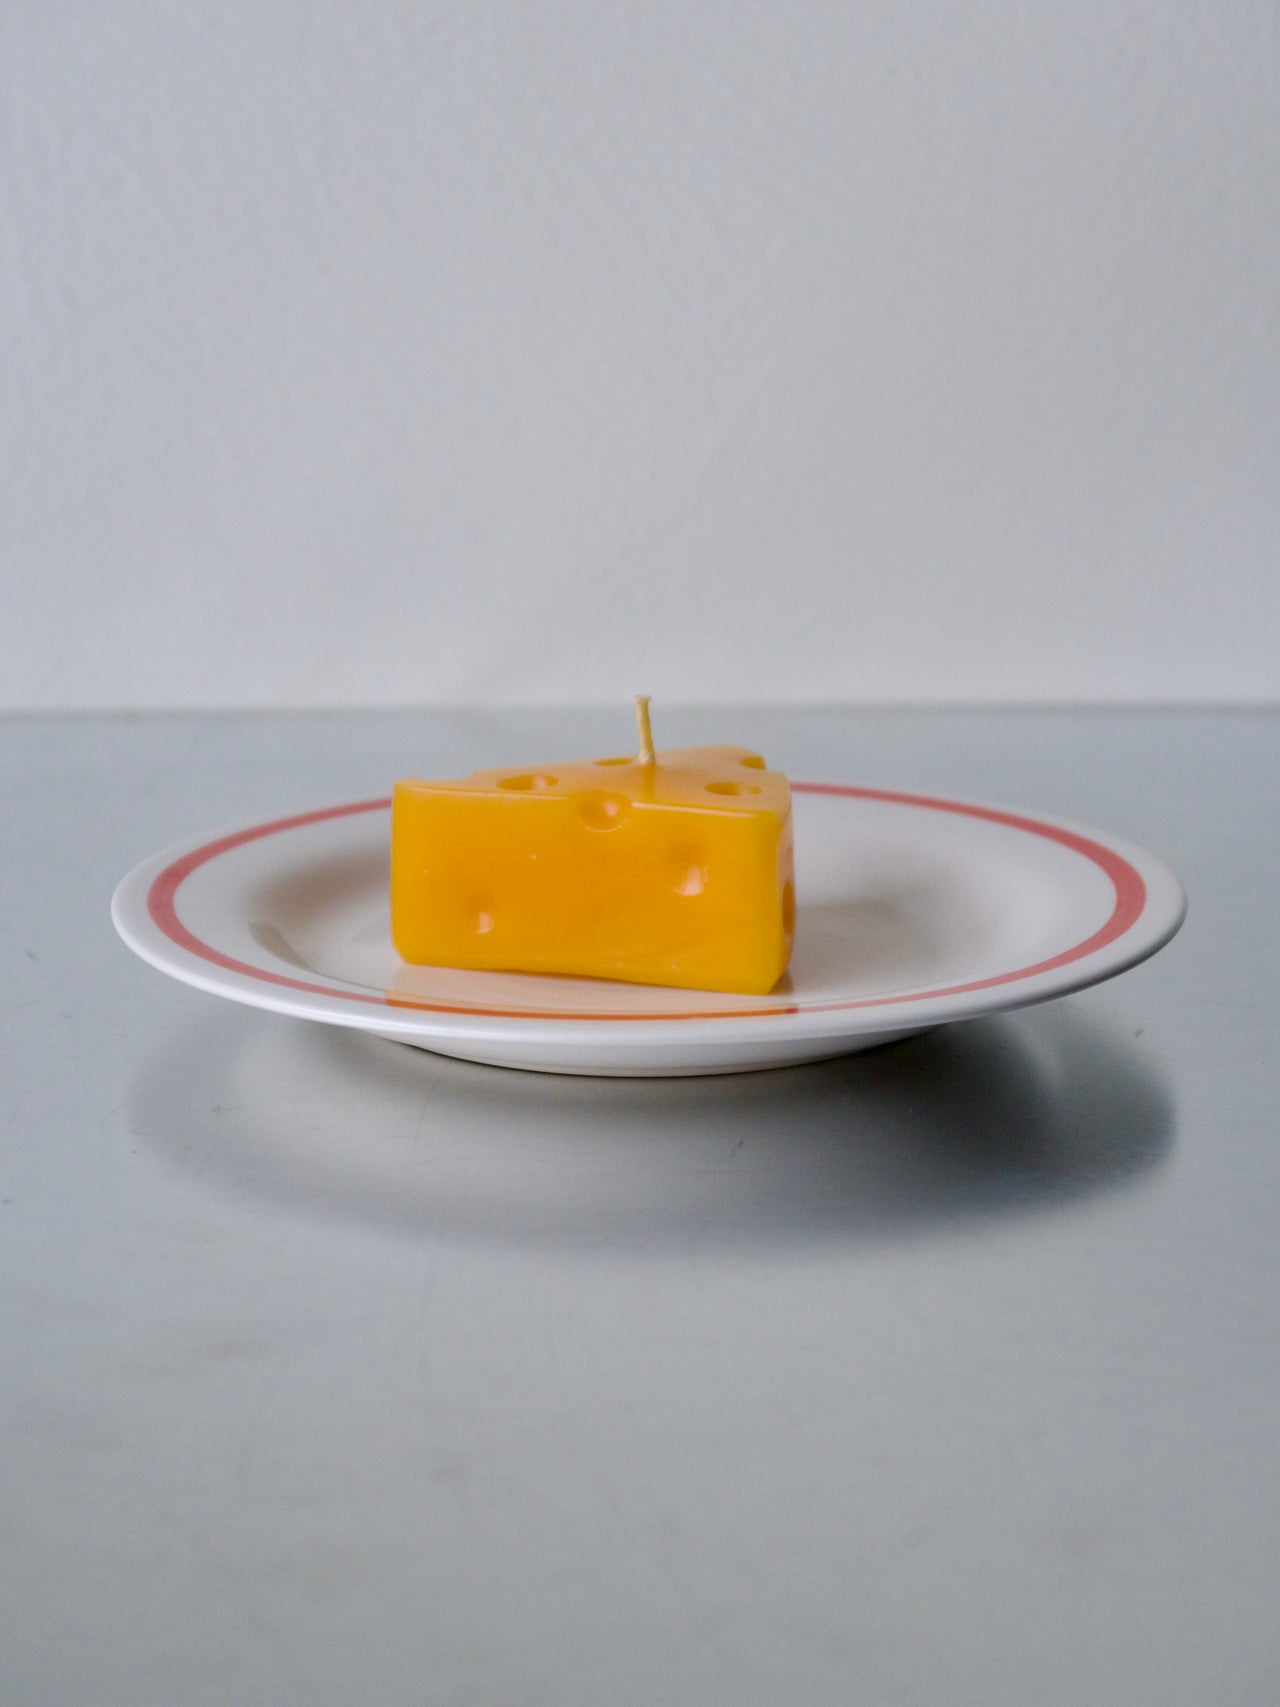 CHEESE CANDLE